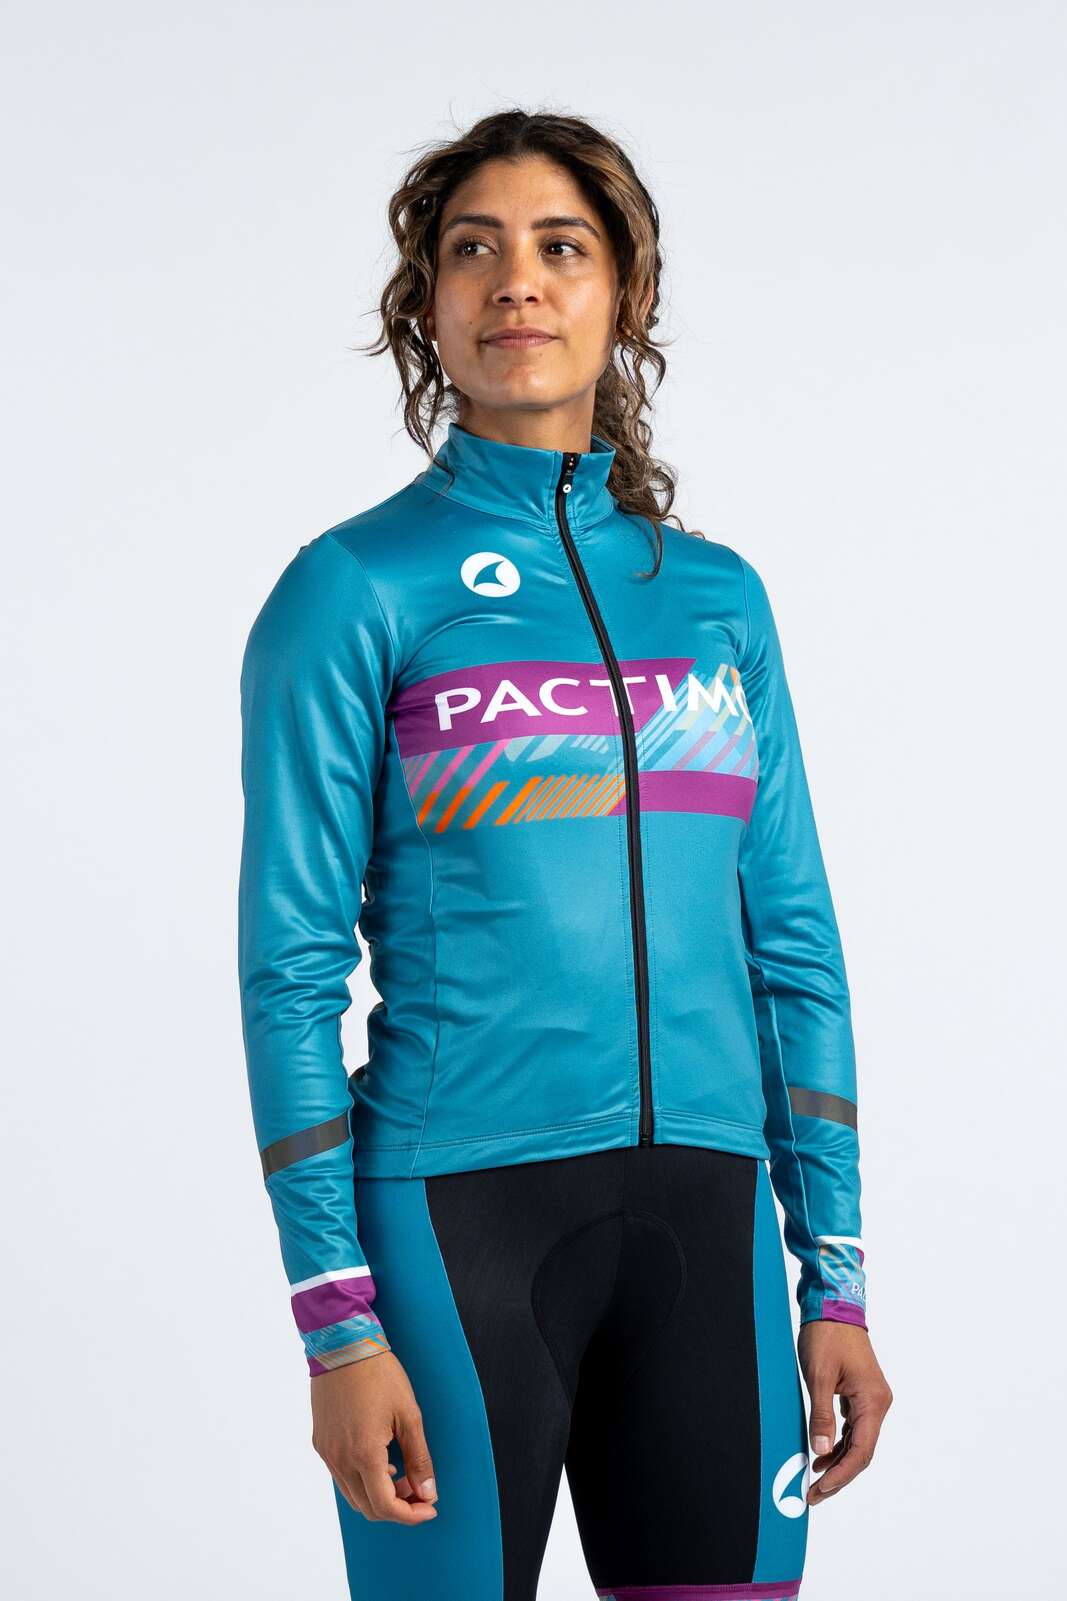 Women's Custom Thermal Cycling Jersey - Front View